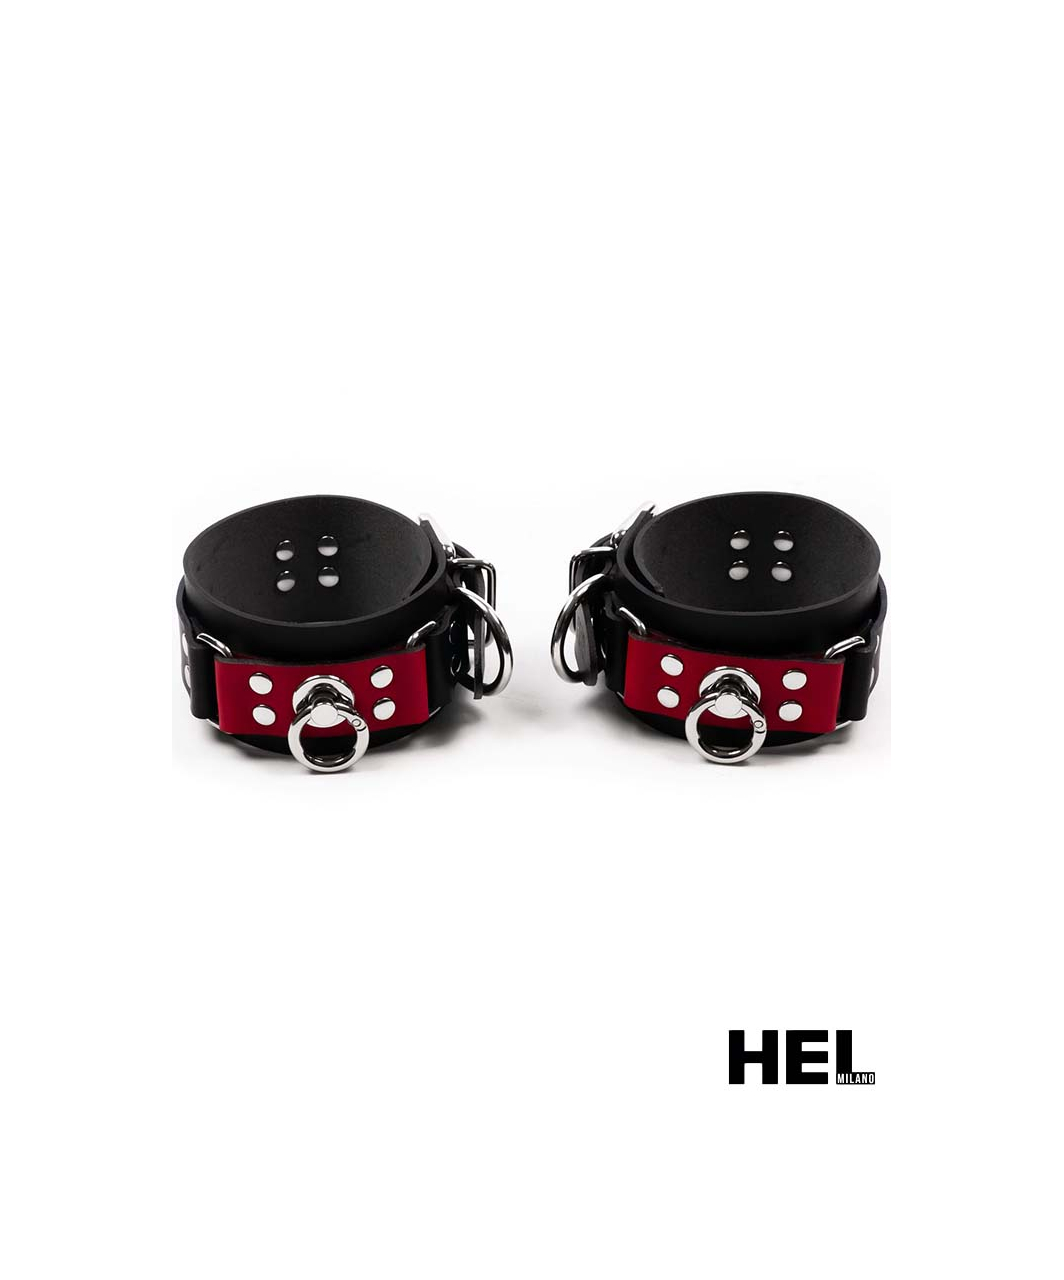 HEL Milano Leather Wrist/Ankle Cuffs in Red & Black